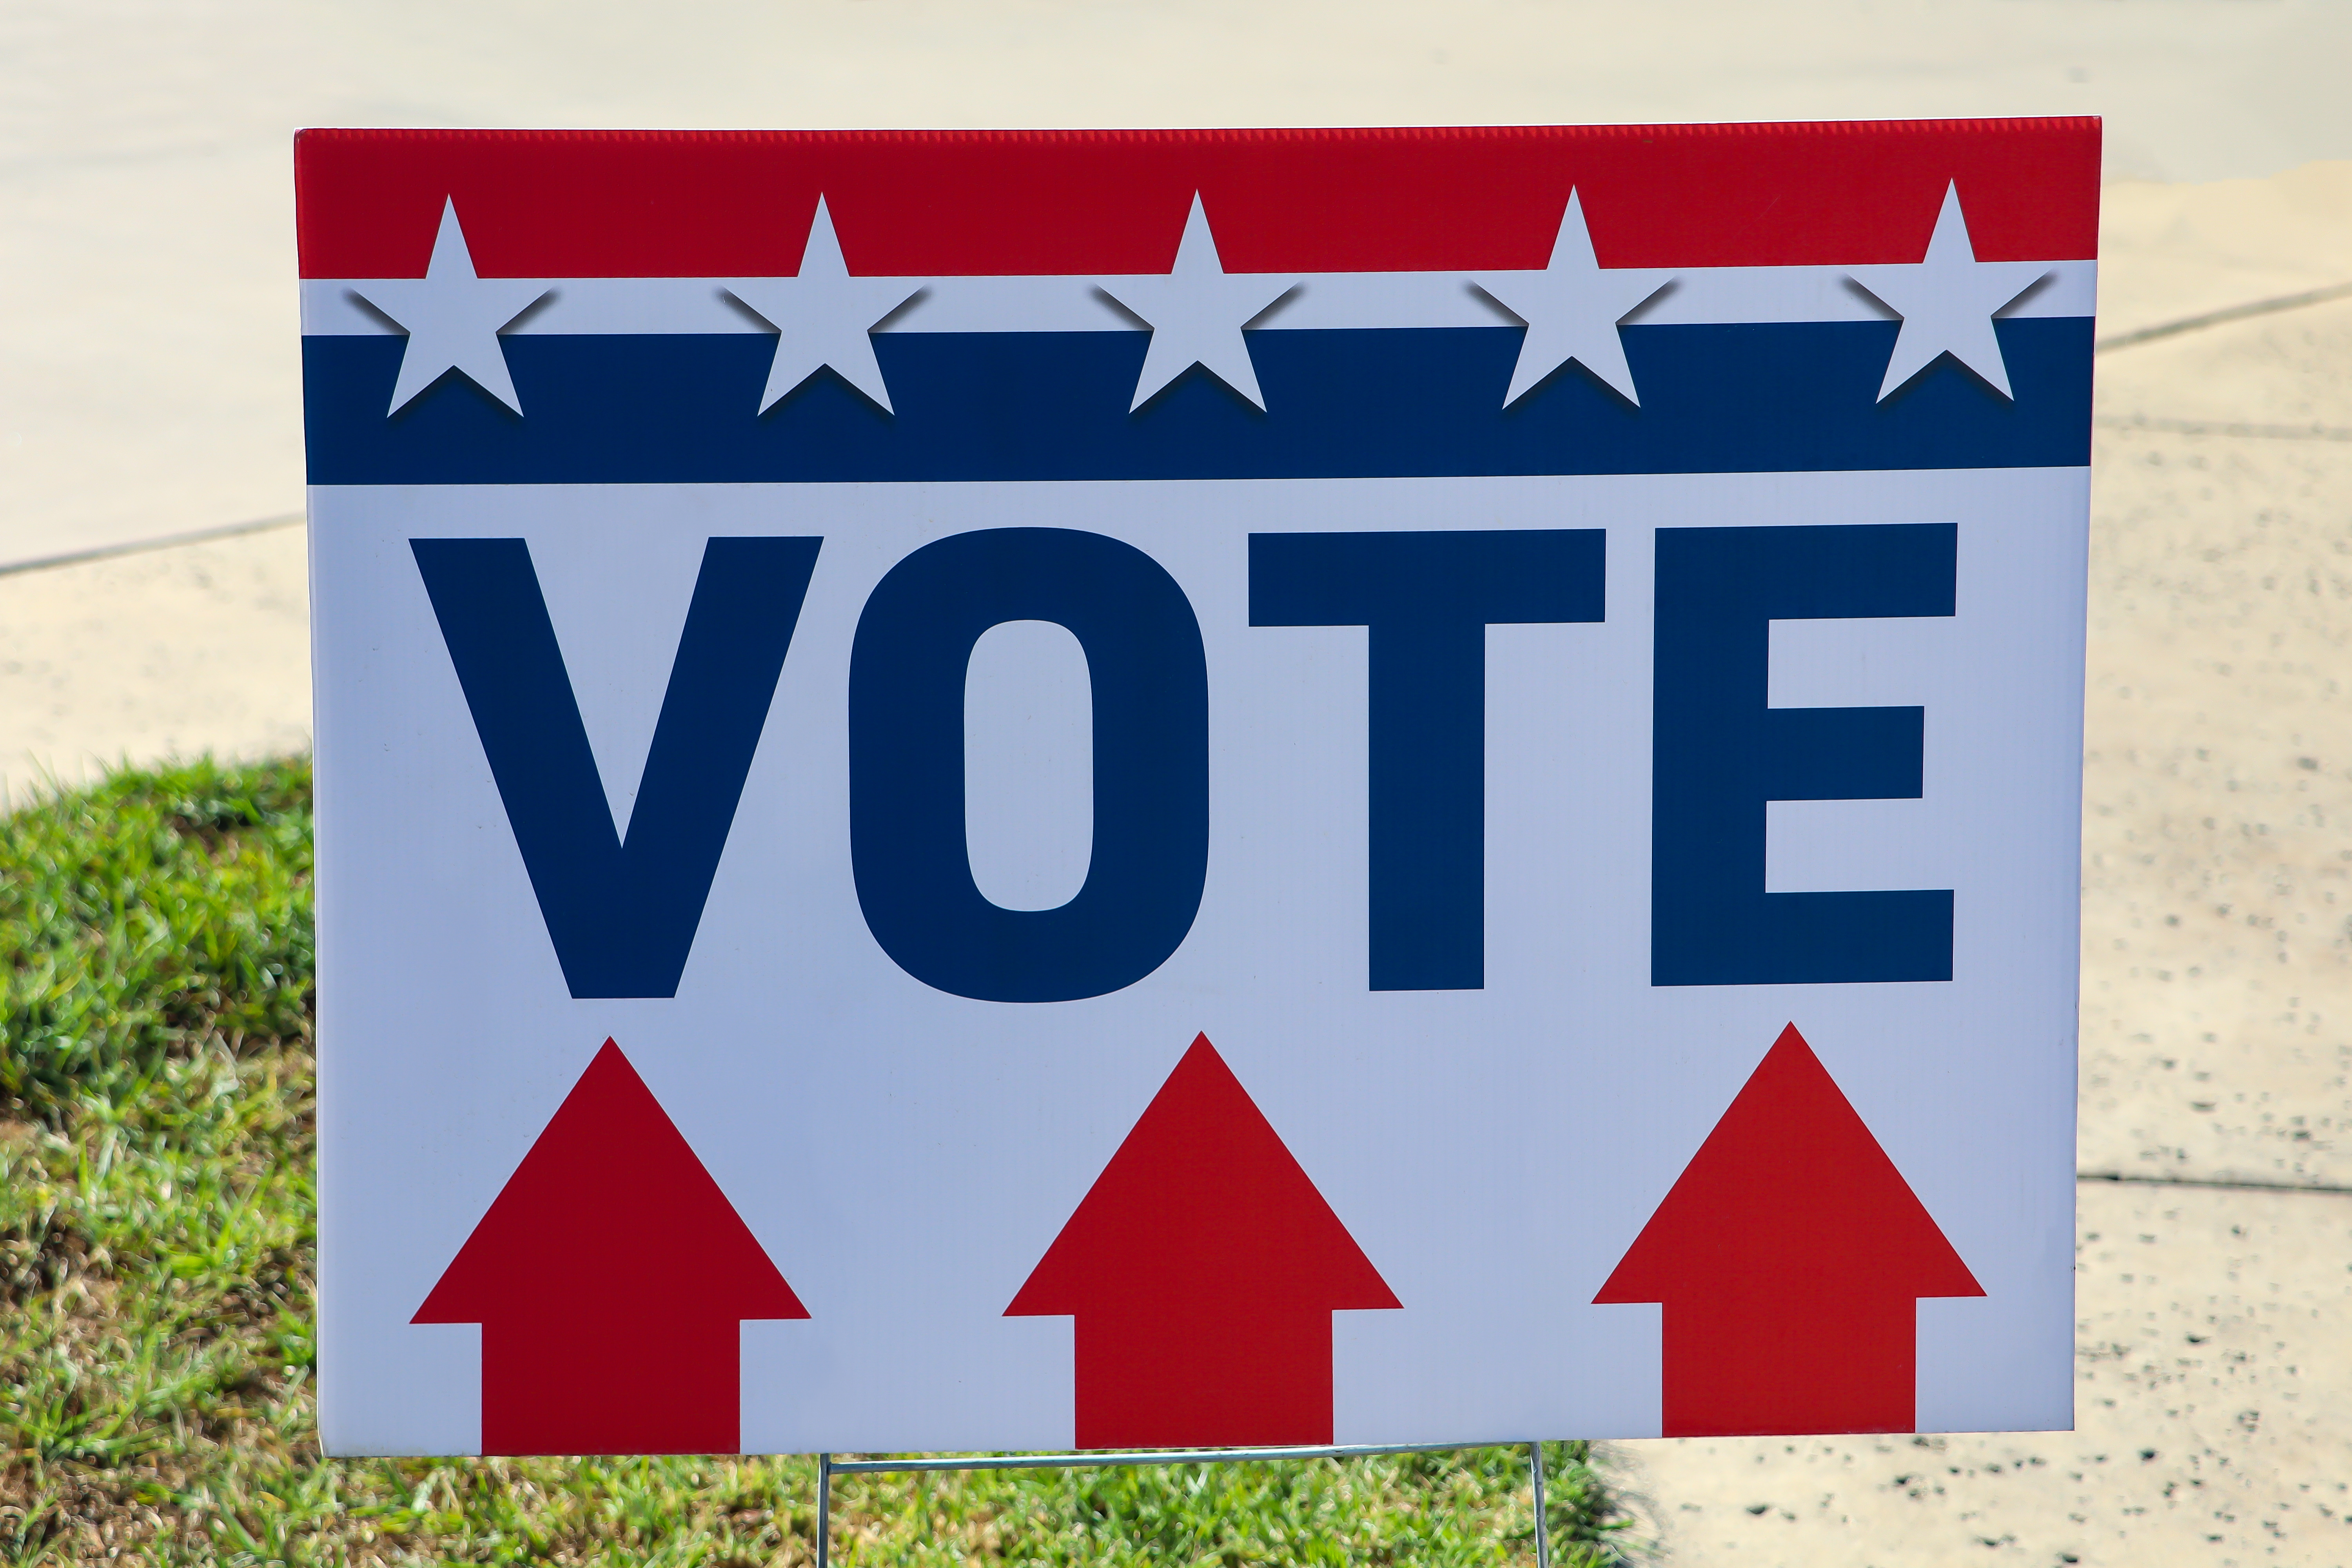 “Vote” directional sign